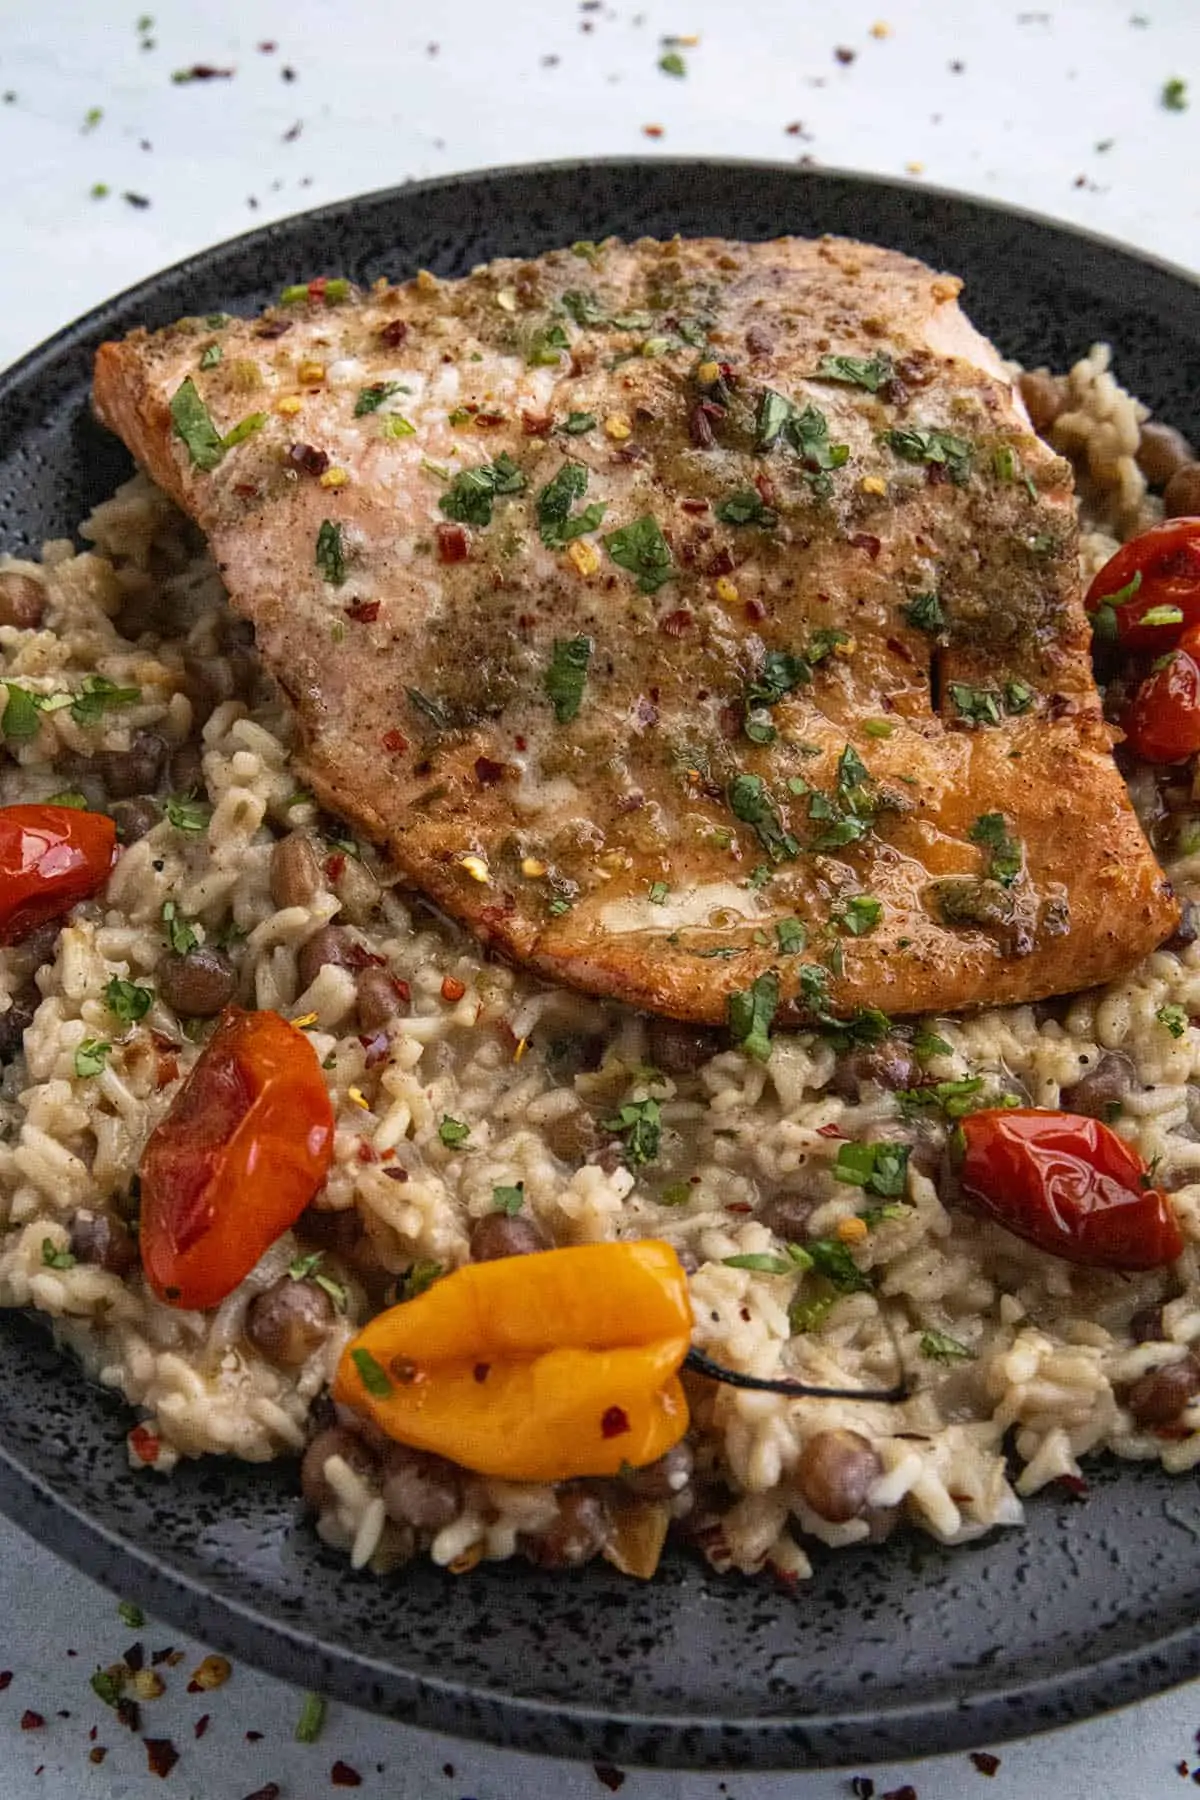 Jerk Salmon served over Jamaican rice and peas